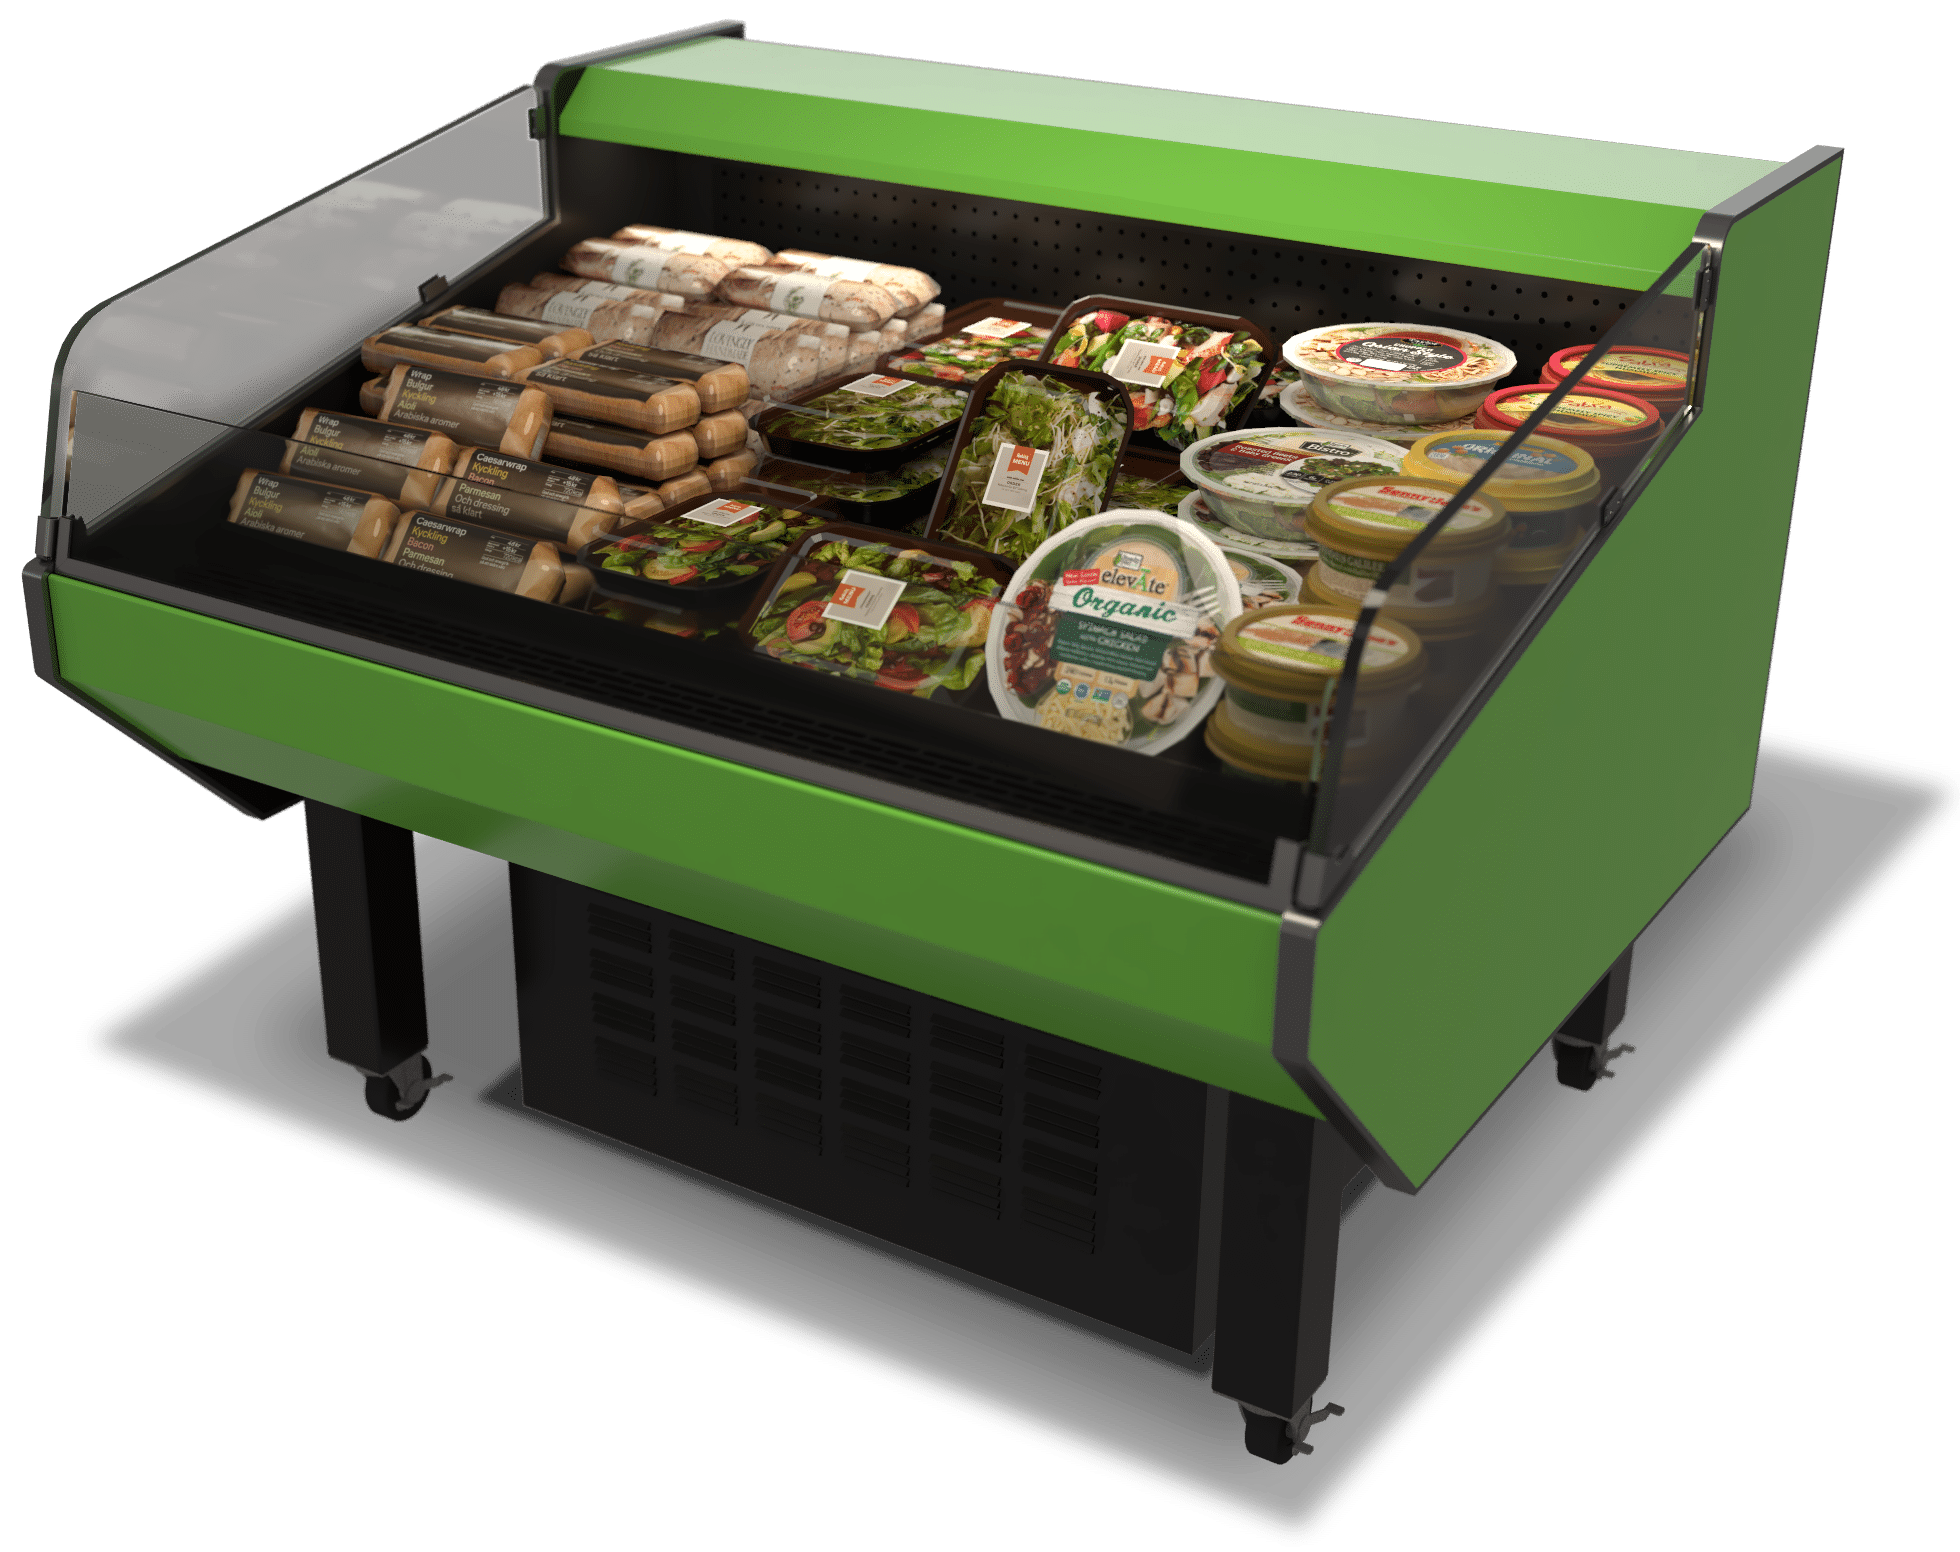 Hillphoenix HS Series of Low,Single-Deck, Self-Service, Refrigerated Display Cases for Retail